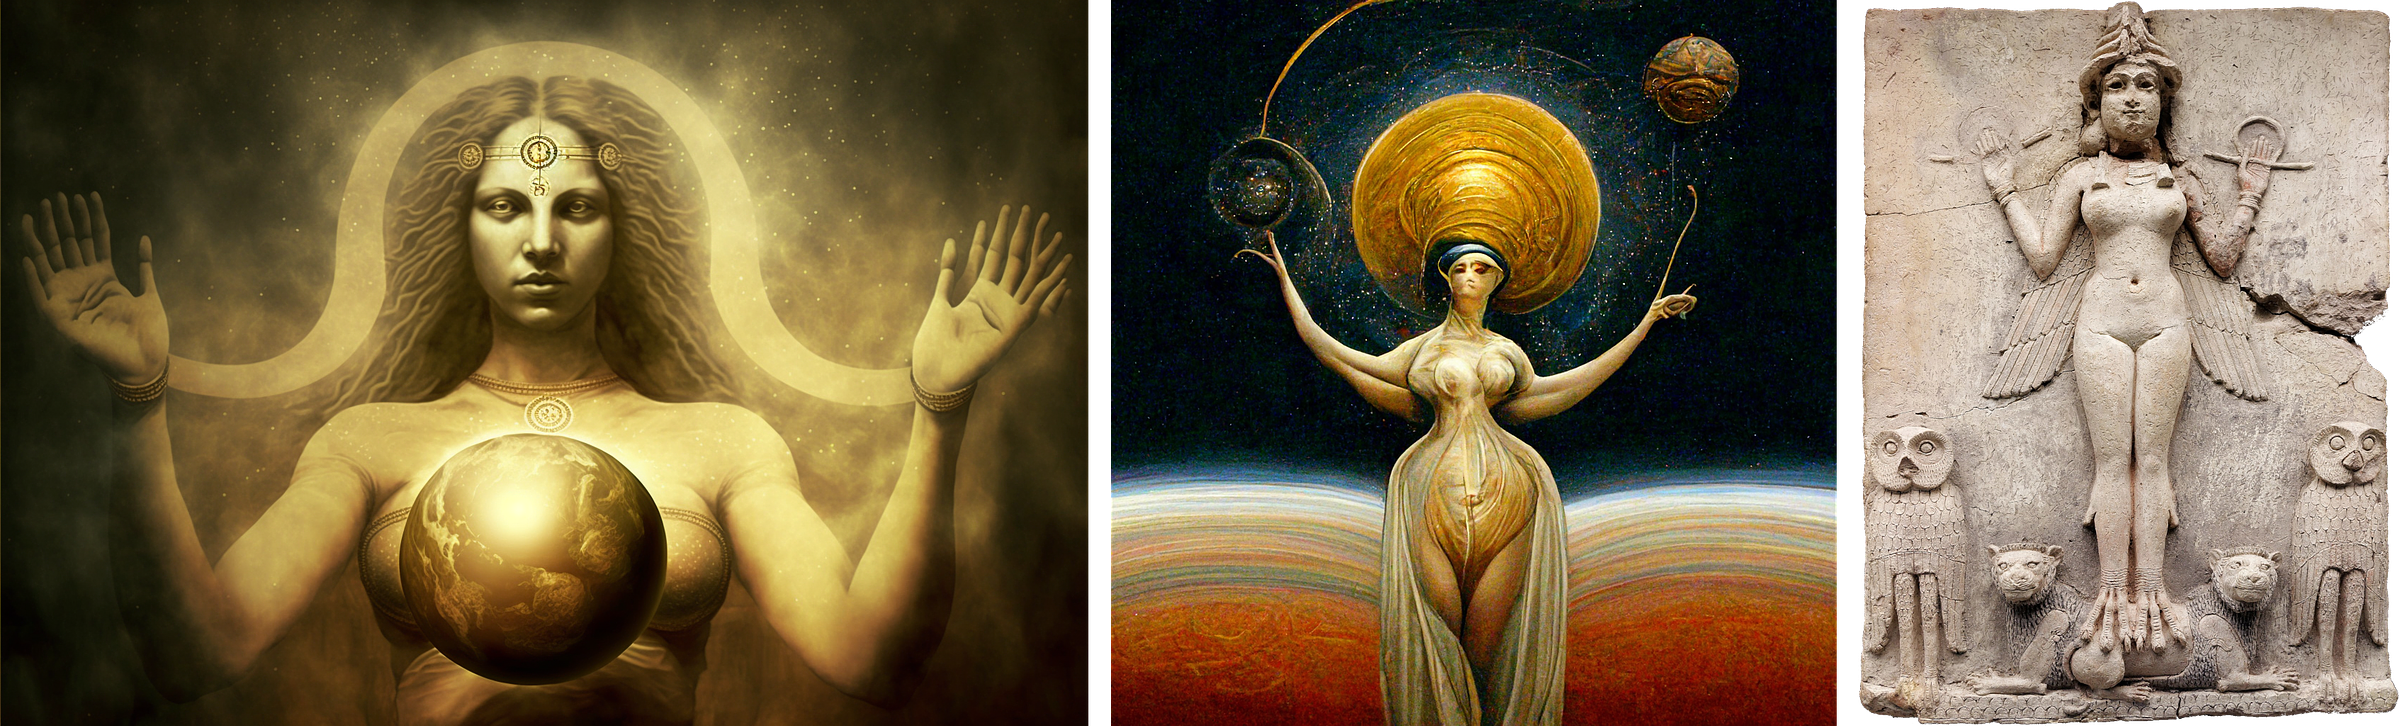 Three images. The first presents a woman in a symmetrical pose, her raised forearms and open palms accompanied by a basketball-sized planet floating in front of and obscuring her chest. Adorned with a medallion necklace and a diadem, she has a symmetrical symbol or halo, surrounded by star-like points of light and a hazy aura over her shoulders. The second image portrays a woman in a loose dress, her extended arms and poorly defined hands gesture toward nebula-like features and planet-like objects. A golden disk resembling a sun or halo, surrounded by stars, shines behind her head, while red, multicolored planetary horizons flank her against a night sky backdrop. The third image shows the Burney Relief, a sculpted Mesopotamian plaque in terra cotta featuring a winged, nude figure with bird's talons, feathered wings, and holding rod and ring symbols. Adorned with a four-tiered headdress, a necklace, and bracelets, the figure emerges from the plaque, accompanied by owls and standing upon lions.